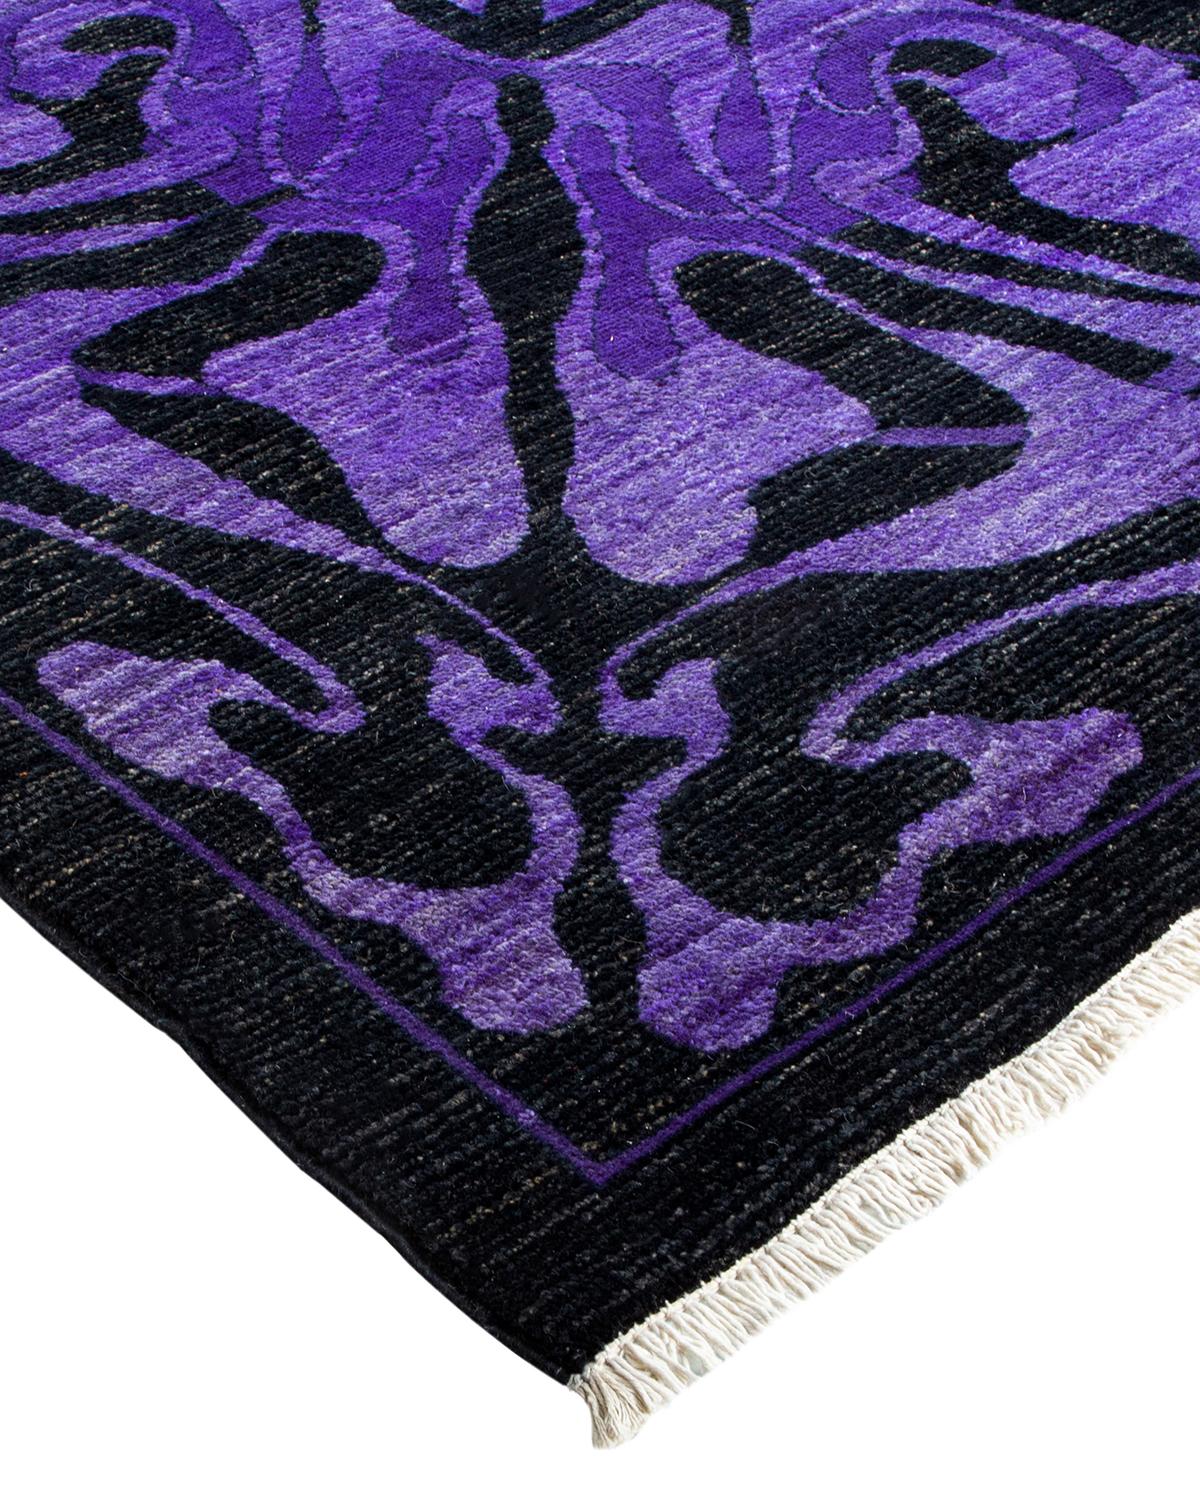 With an amalgam of sizes and aesthetic influences ranging from Art Deco to Rorschach and modernist, the rugs in the Eclectic collection defy definition, asking instead to become intriguing focal points of a room. They are at once statement pieces